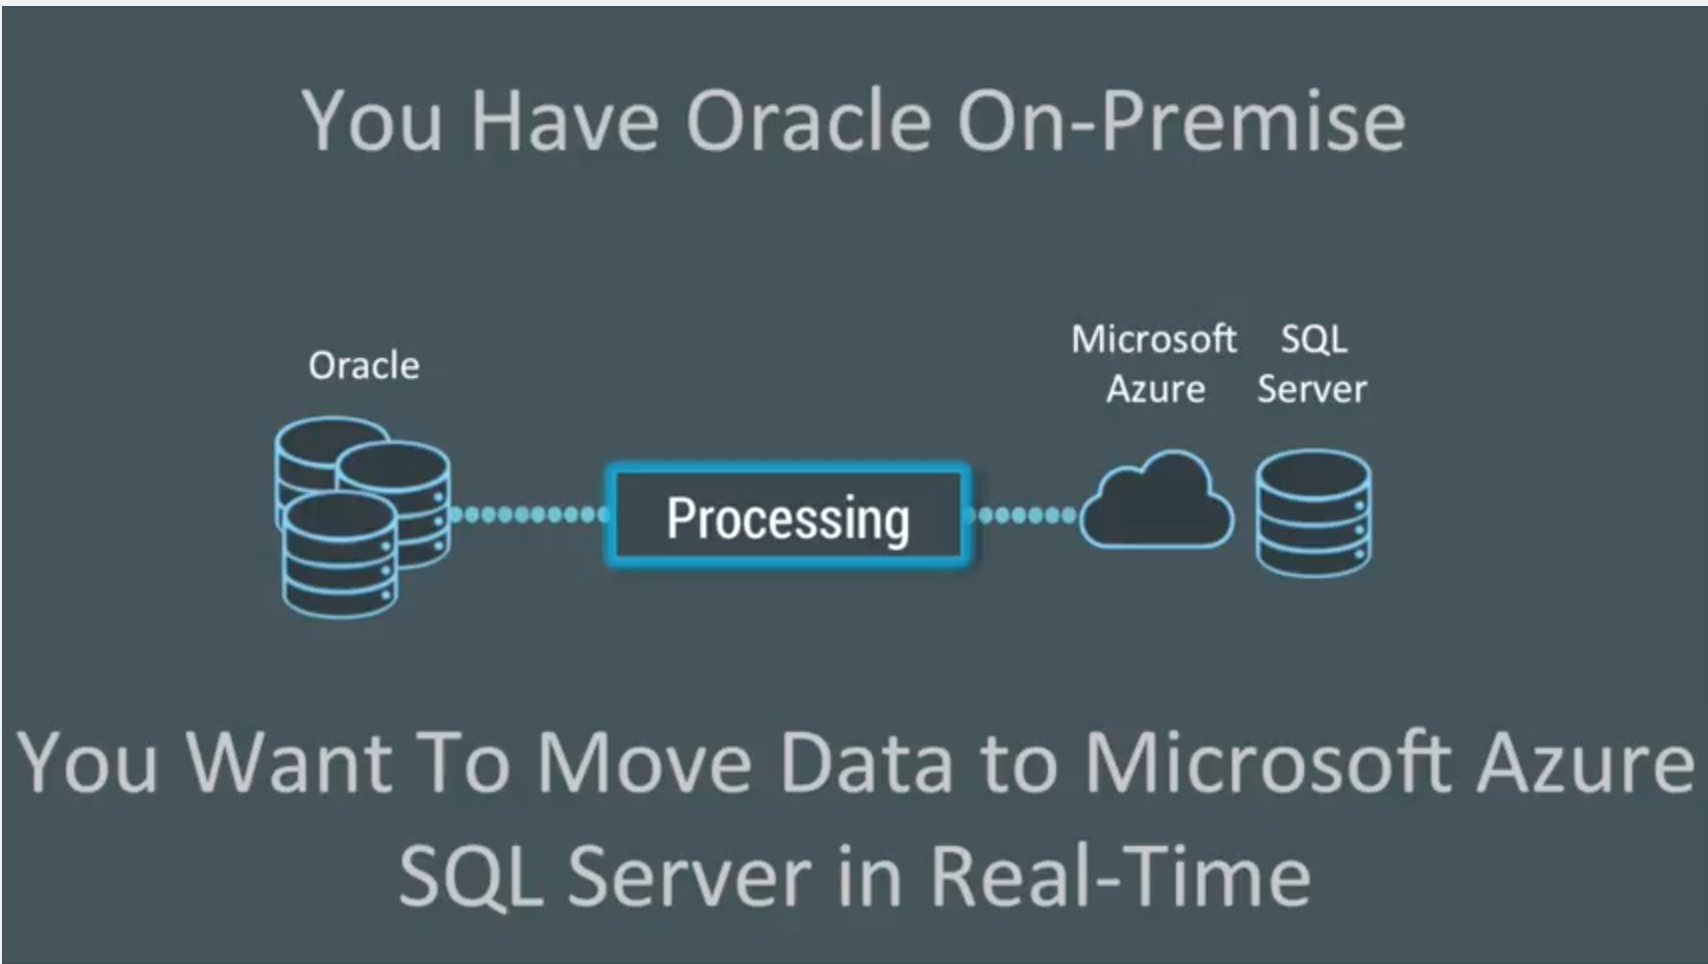 Migrate Oracle Data to Azure in Real Time